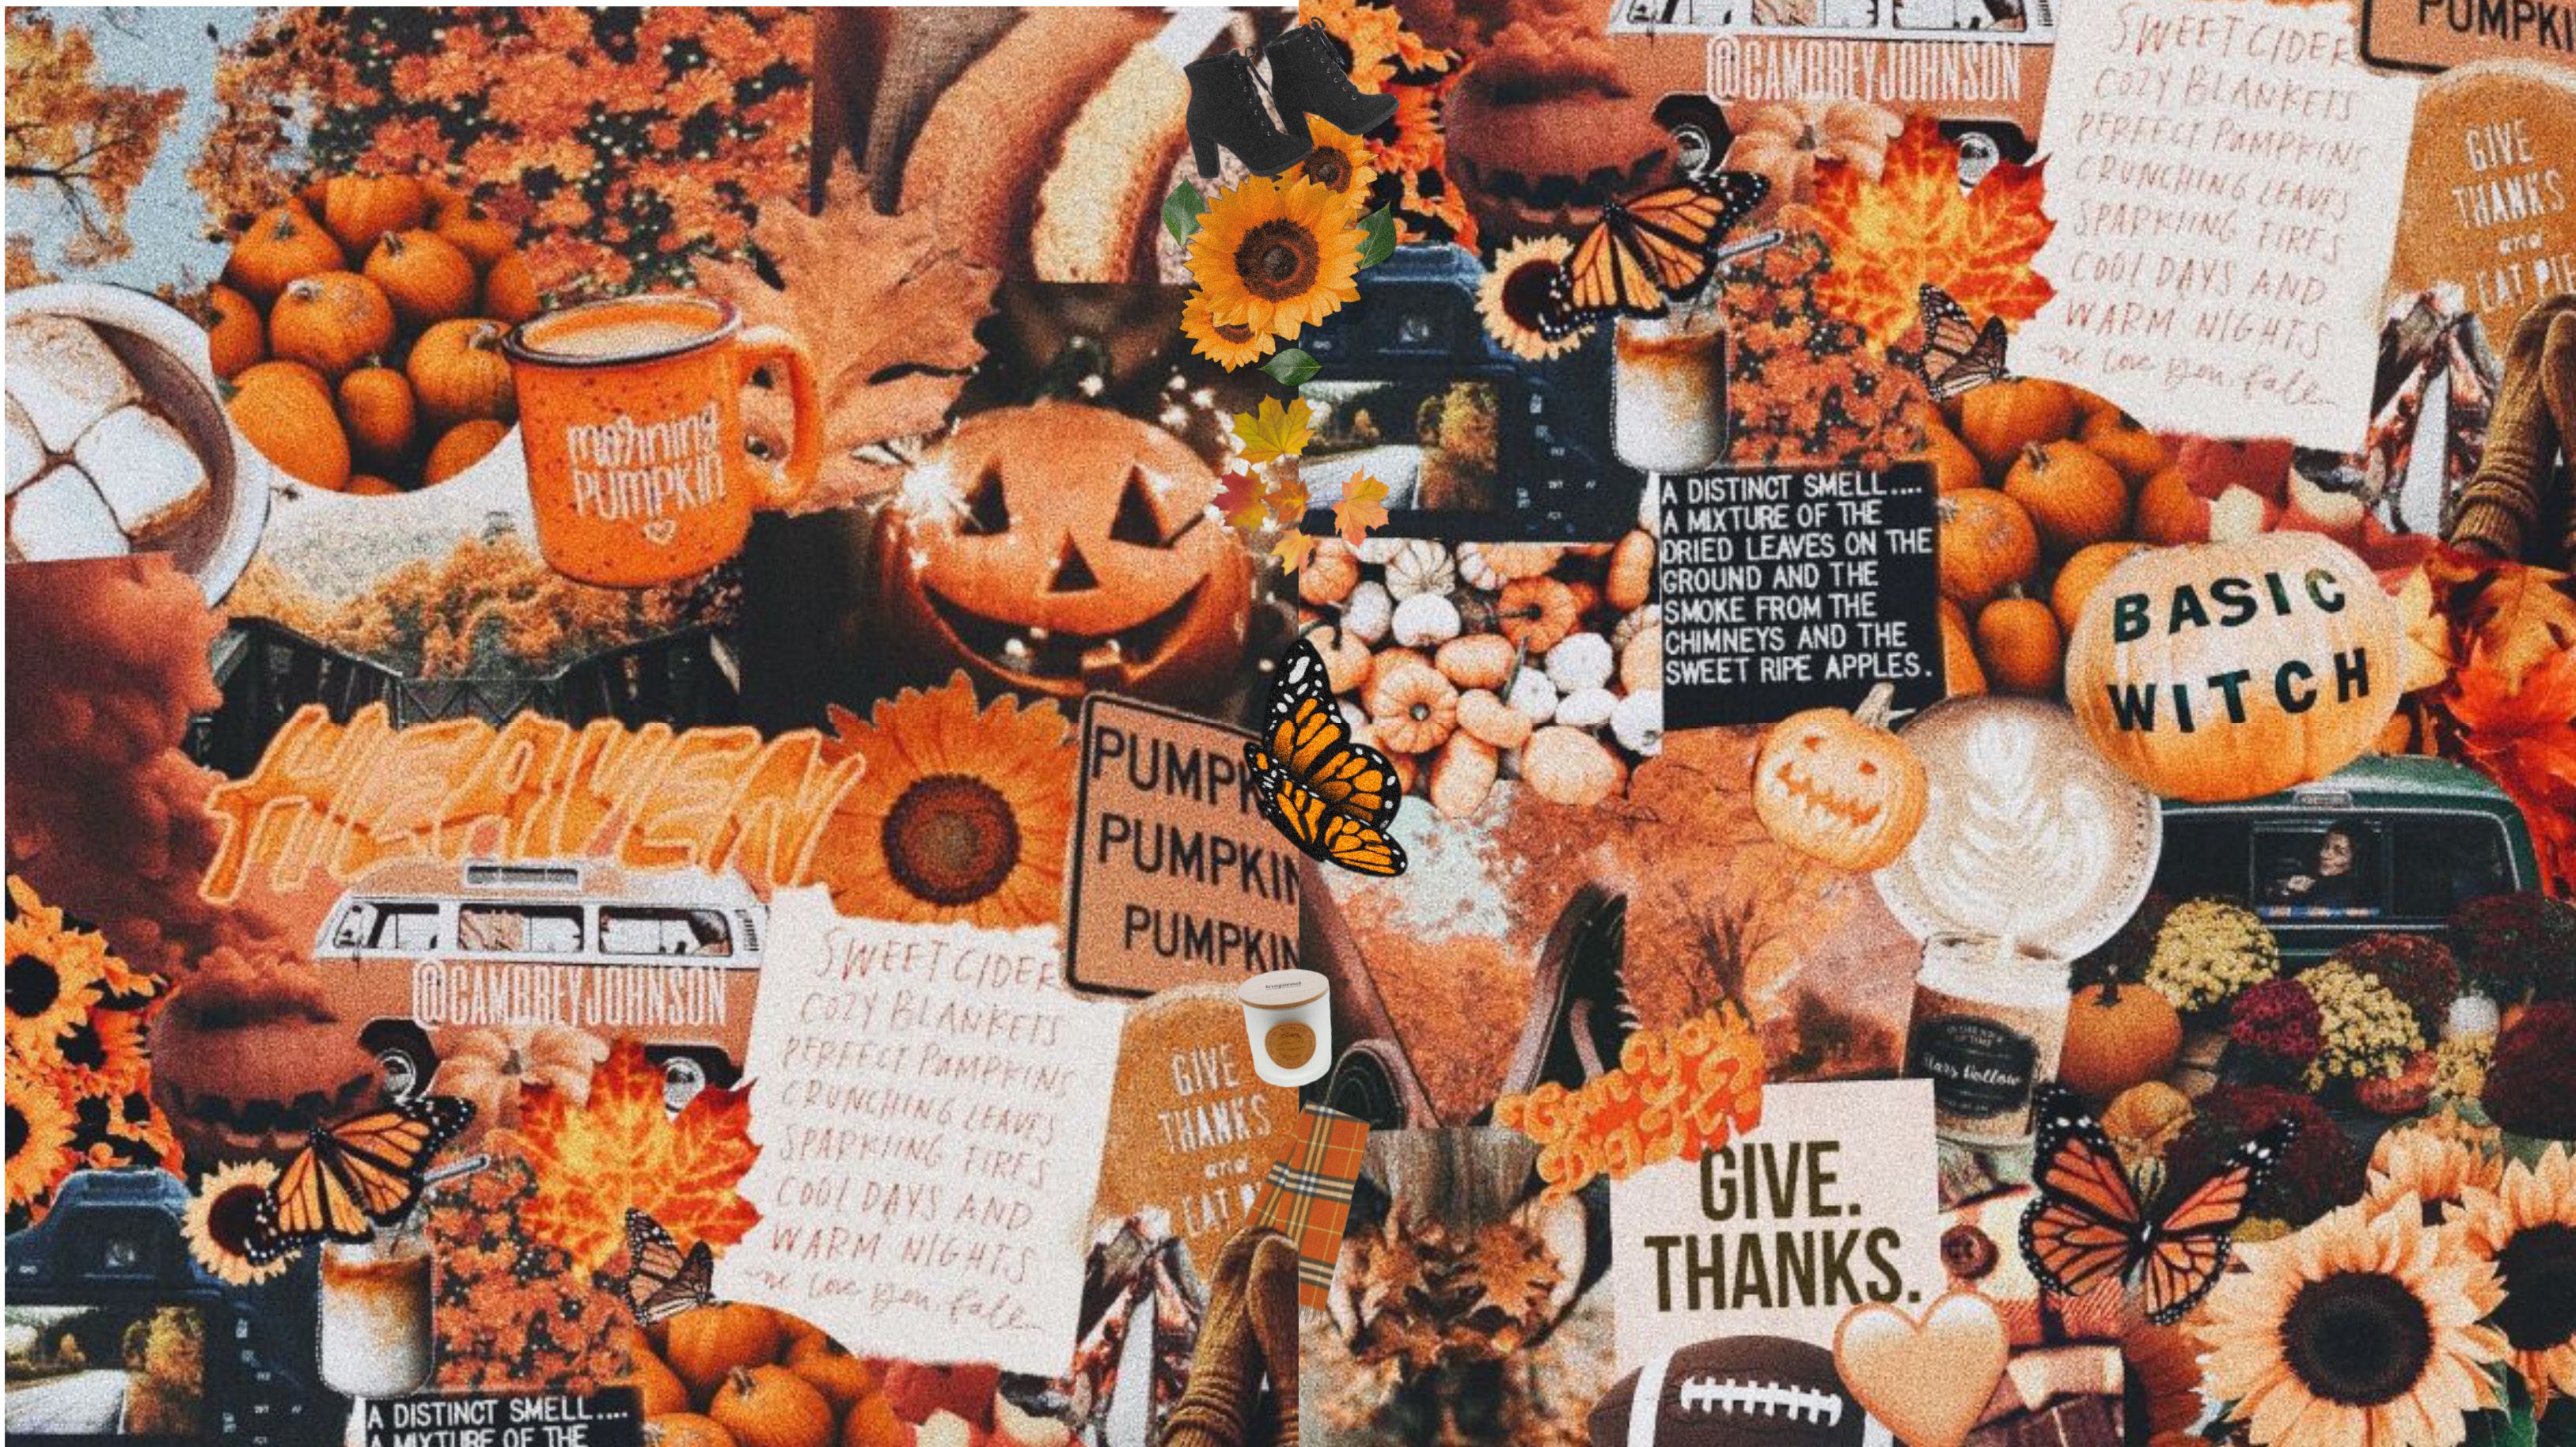 A collage of orange and yellow images including pumpkins, sunflowers, and signs that say 